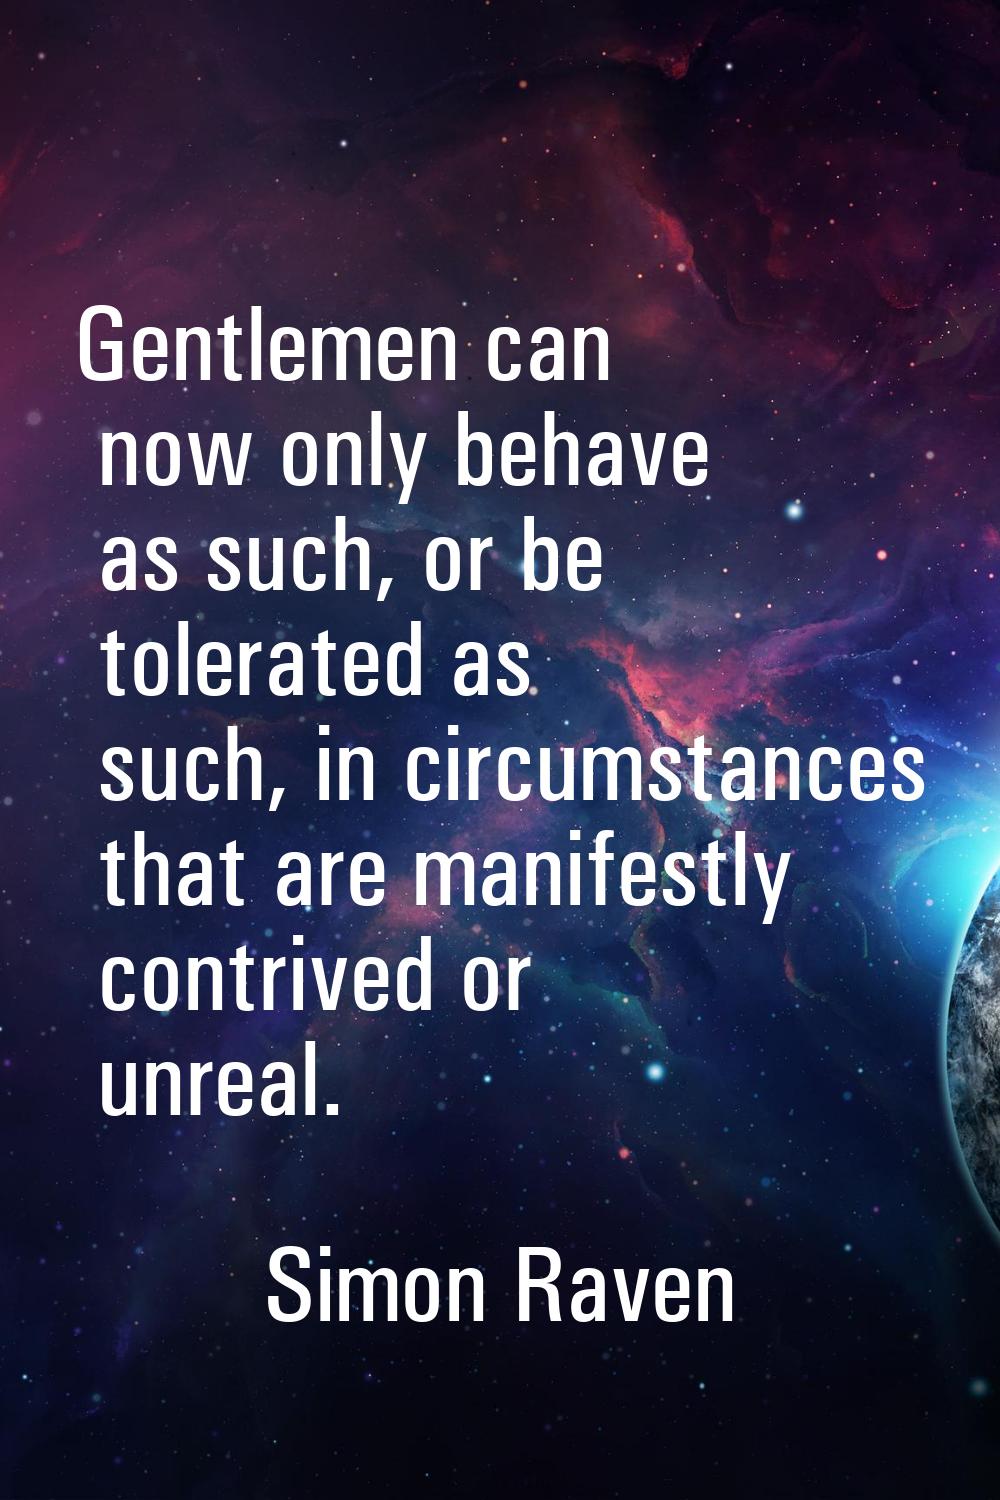 Gentlemen can now only behave as such, or be tolerated as such, in circumstances that are manifestl